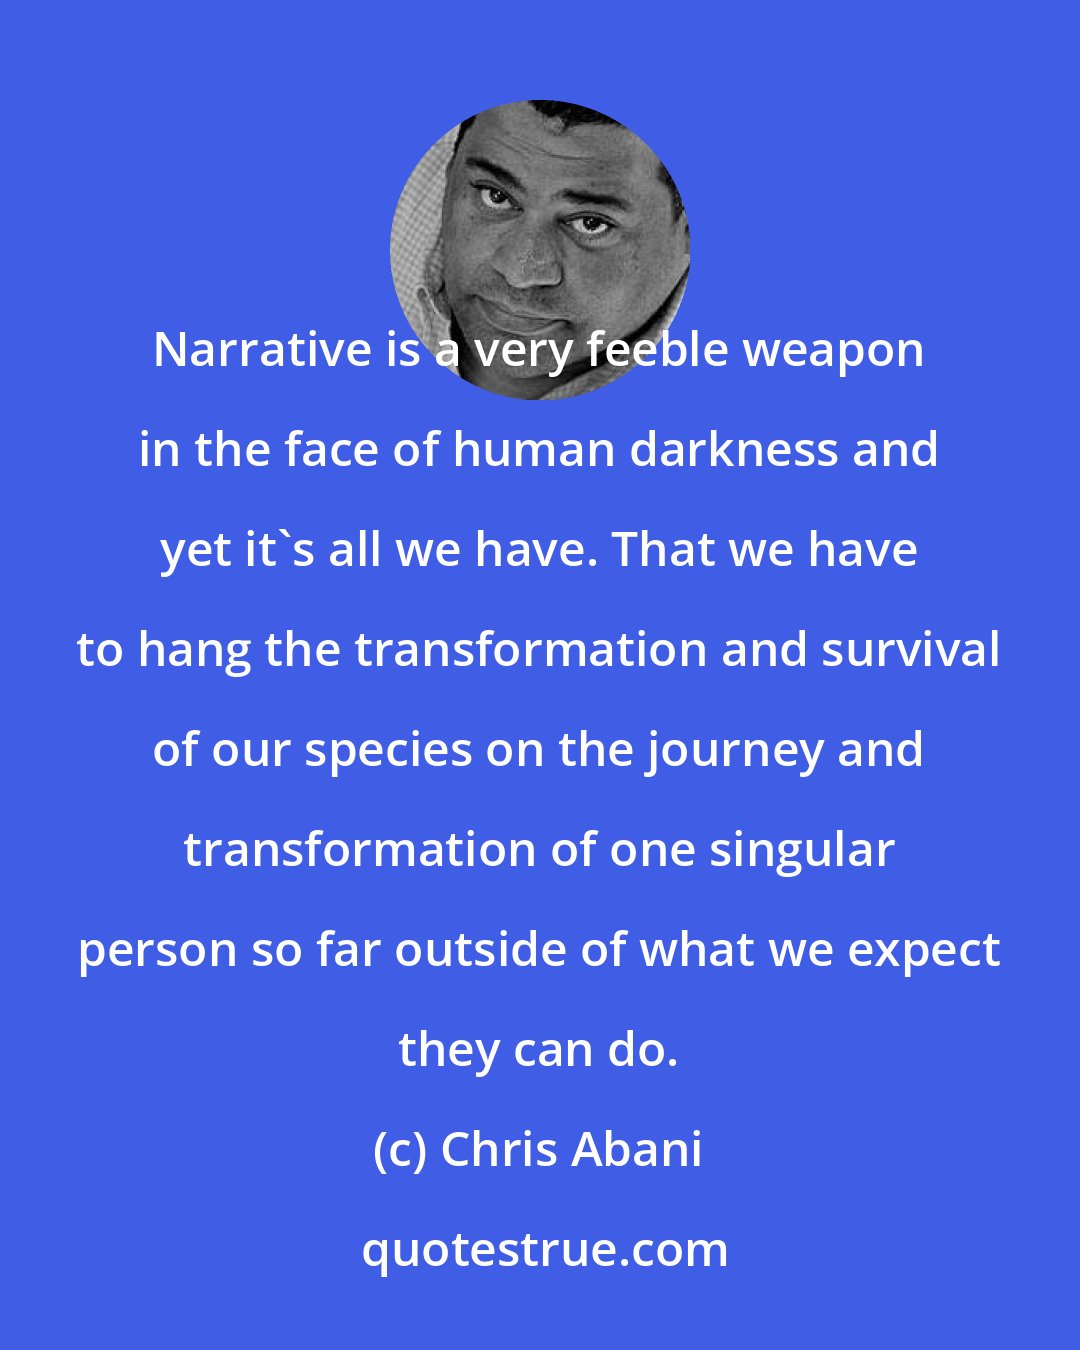 Chris Abani: Narrative is a very feeble weapon in the face of human darkness and yet it's all we have. That we have to hang the transformation and survival of our species on the journey and transformation of one singular person so far outside of what we expect they can do.